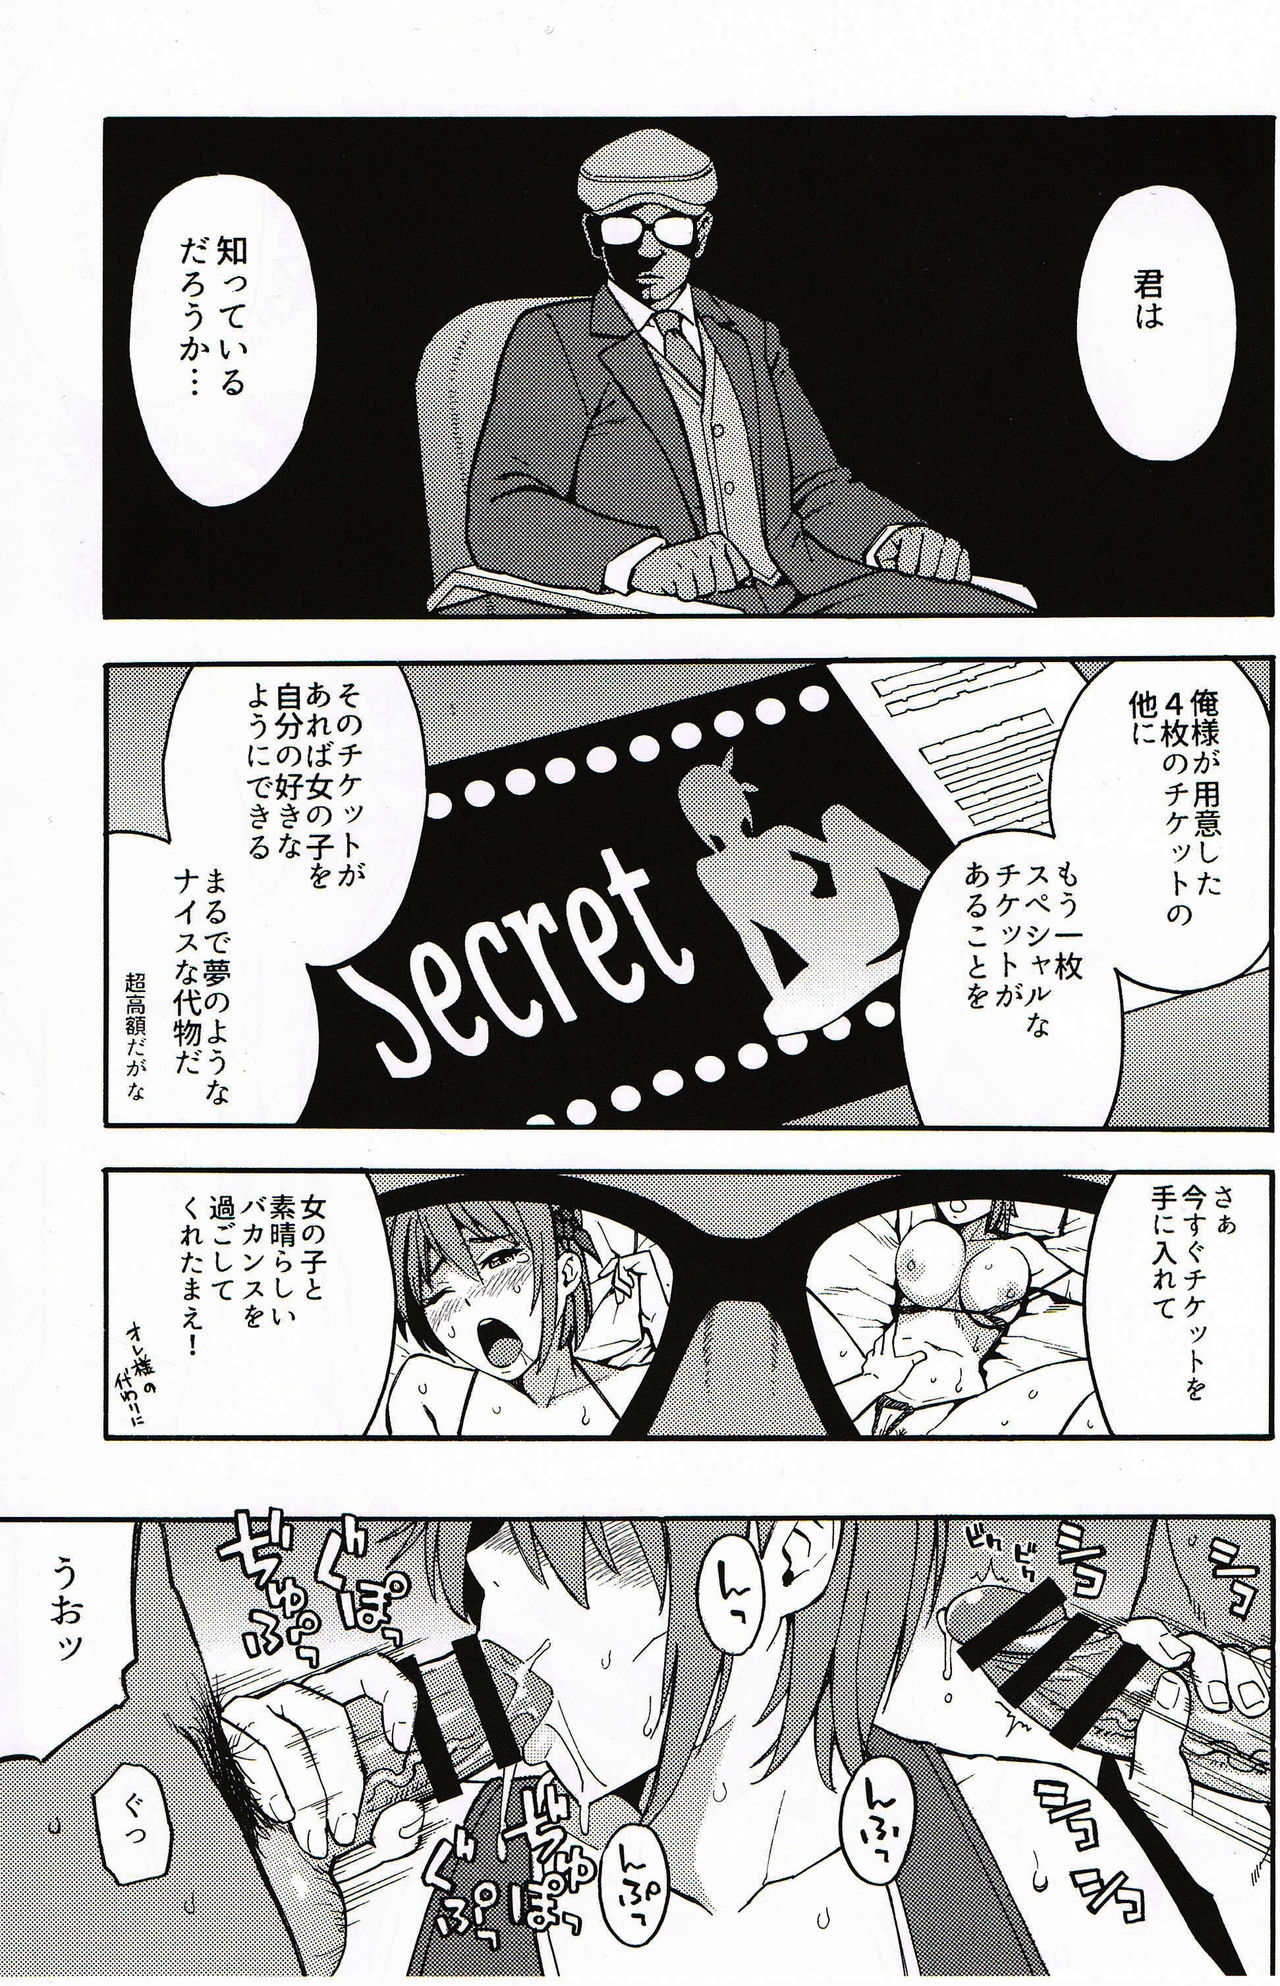 (COMIC1☆10) [SOLID AIR (Zonda)] DPAX (Dead or Alive) (COMIC1☆10) [SOLID AIR (ぞんだ)] DPAX (デッド・オア・アライブ)